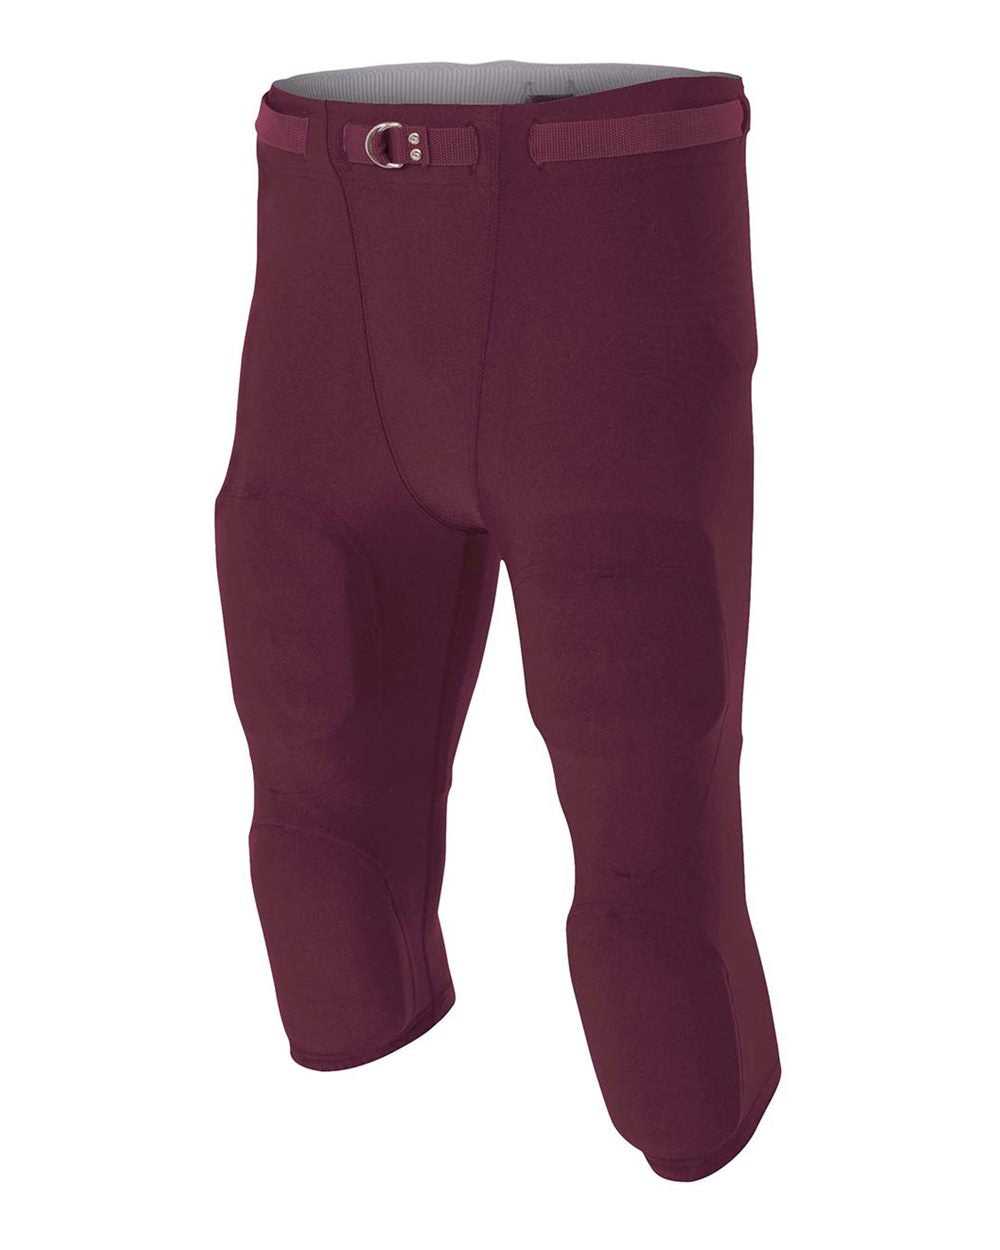 A4 N6181 Men's Flyless Football Pant (Pads Not Included) - Maroon - HIT a Double